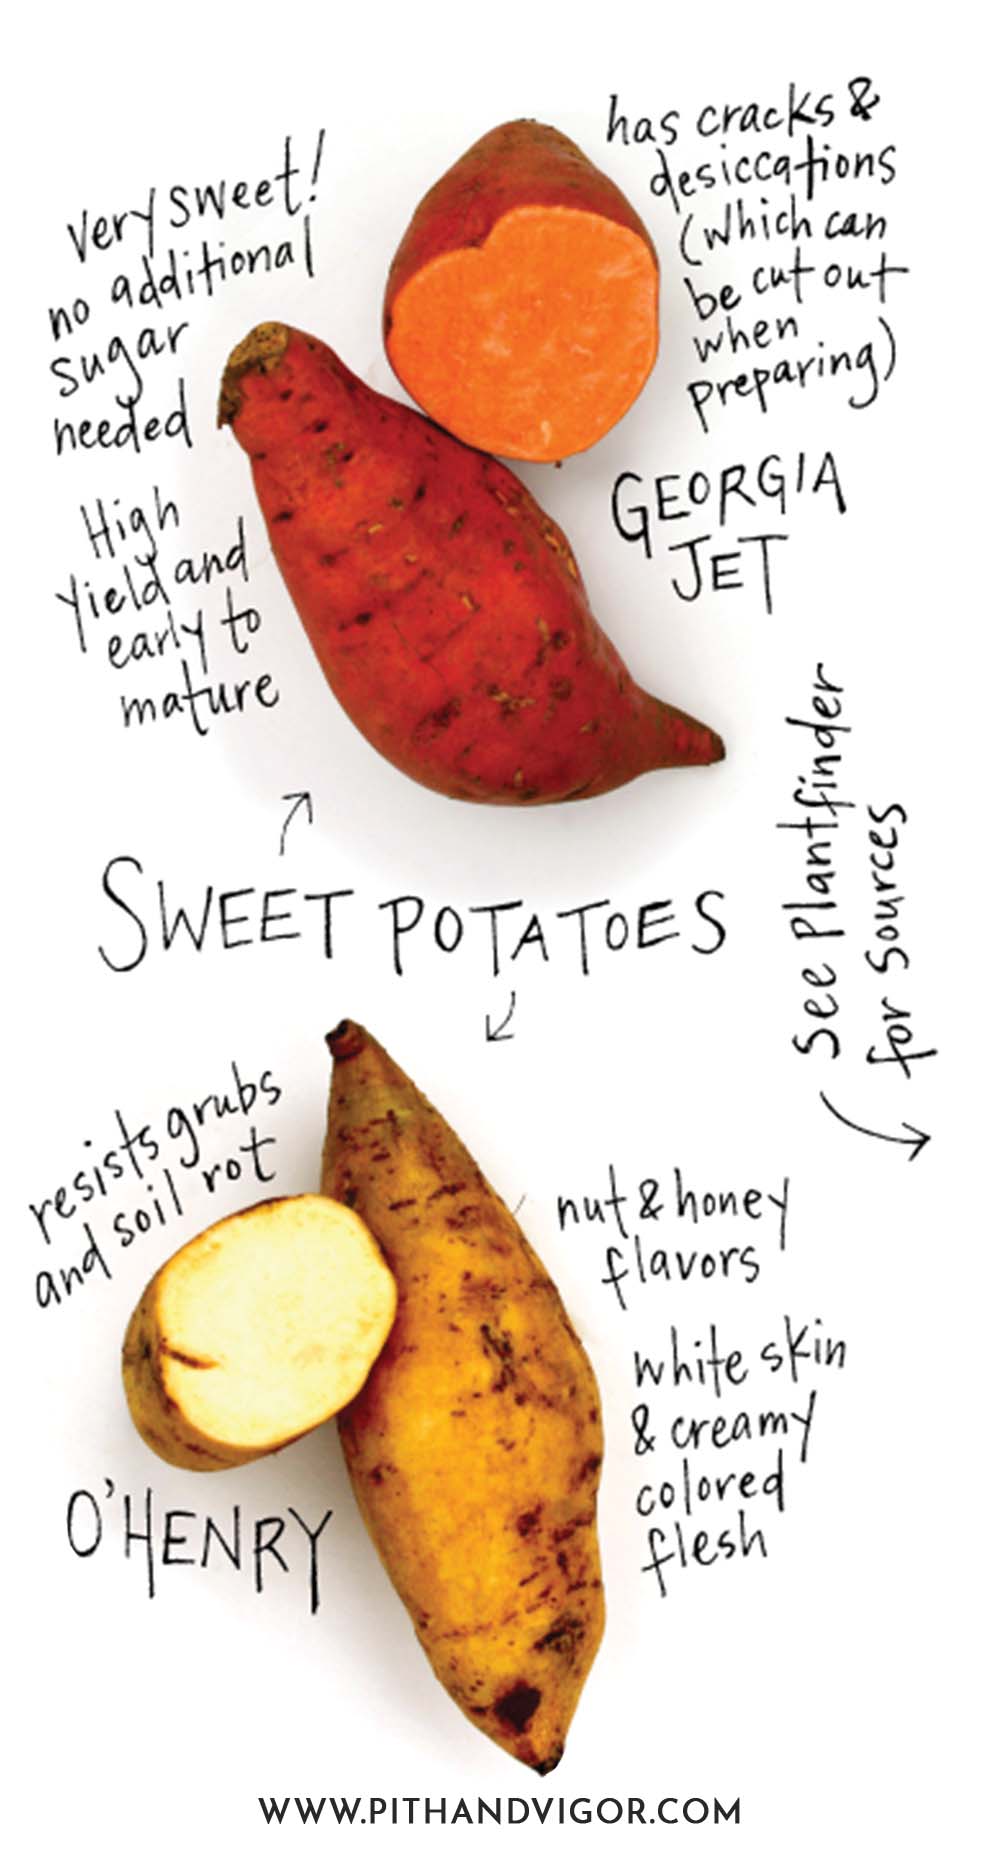 There are many more types of potatoes that can be grown nationwide - but these are some of the varieties that can be grown in the Northern USA (and Canada).illustration of Georgia jet and o'henry sweet potatoes